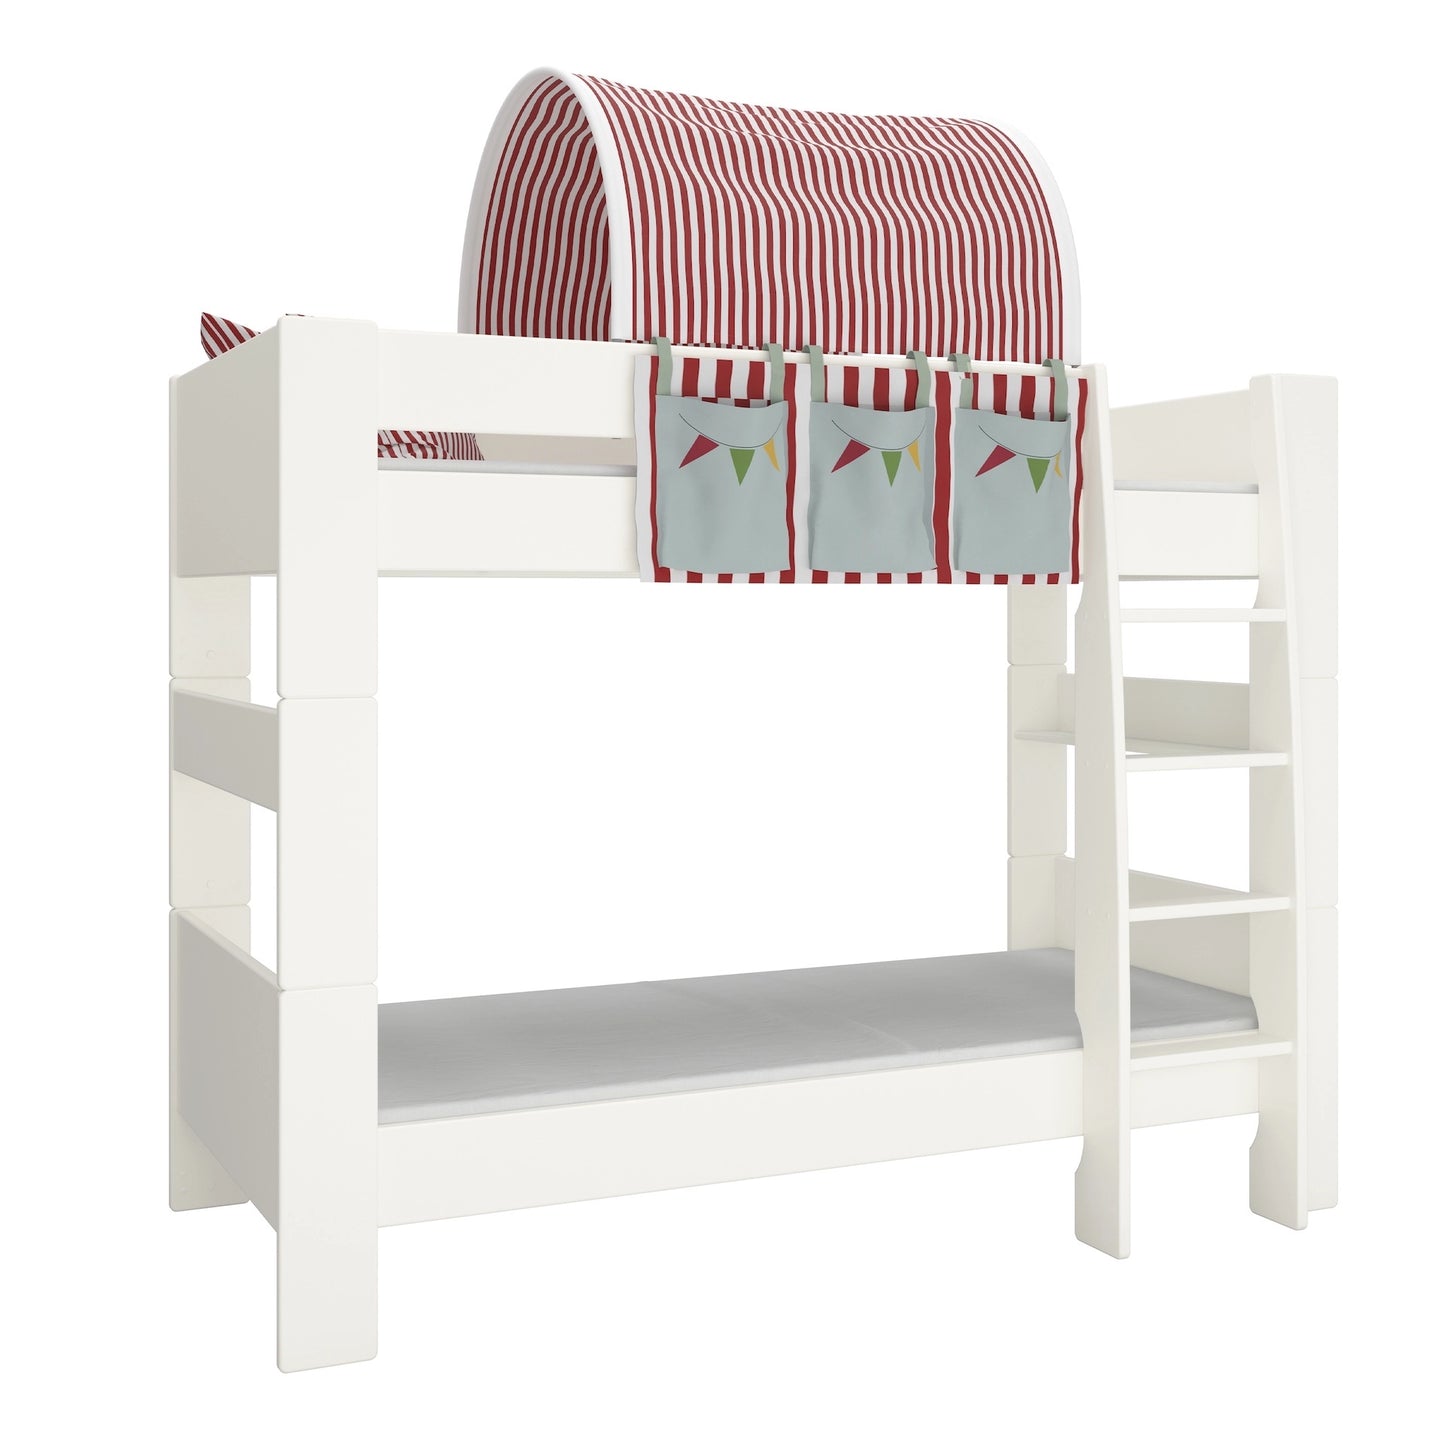 Furniture To Go Steens For Kids Circus Pockets